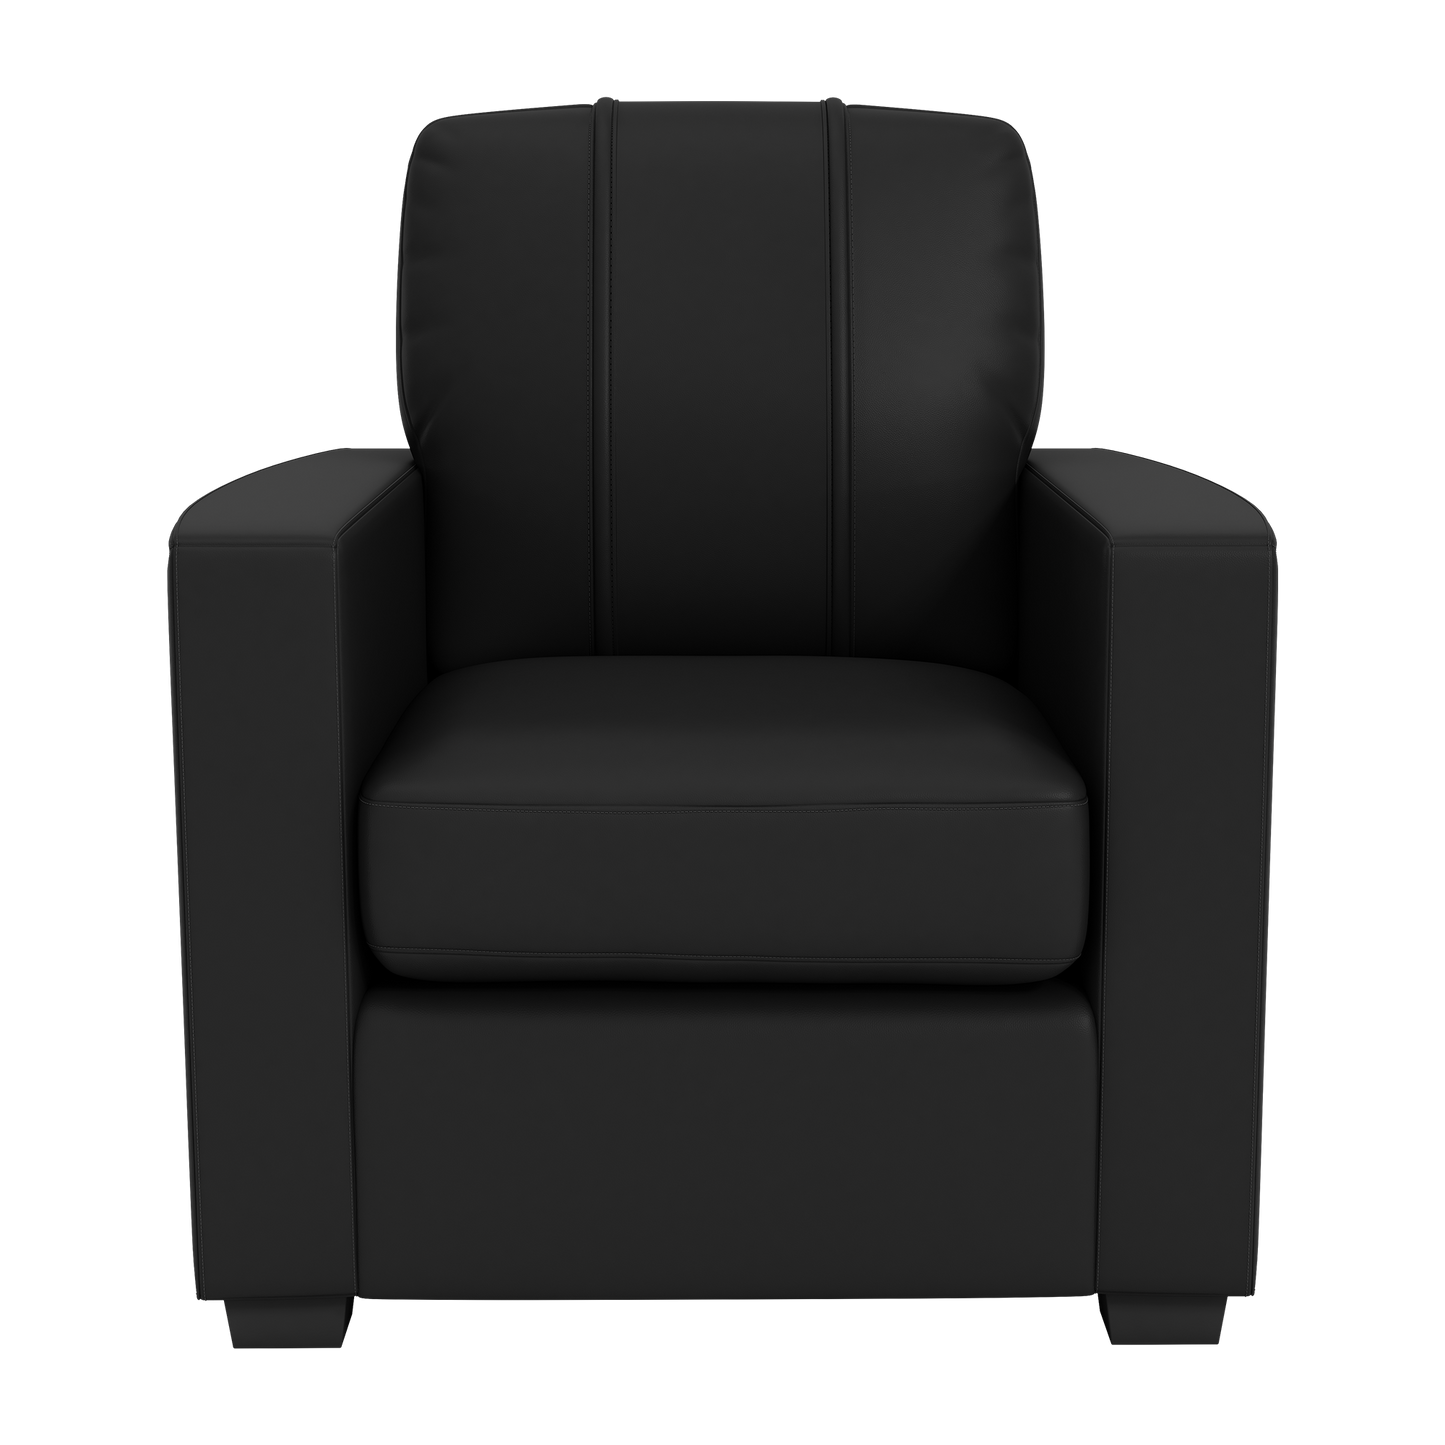 Silver Club Chair with Los Angeles Dodgers 2020 Championship Logo